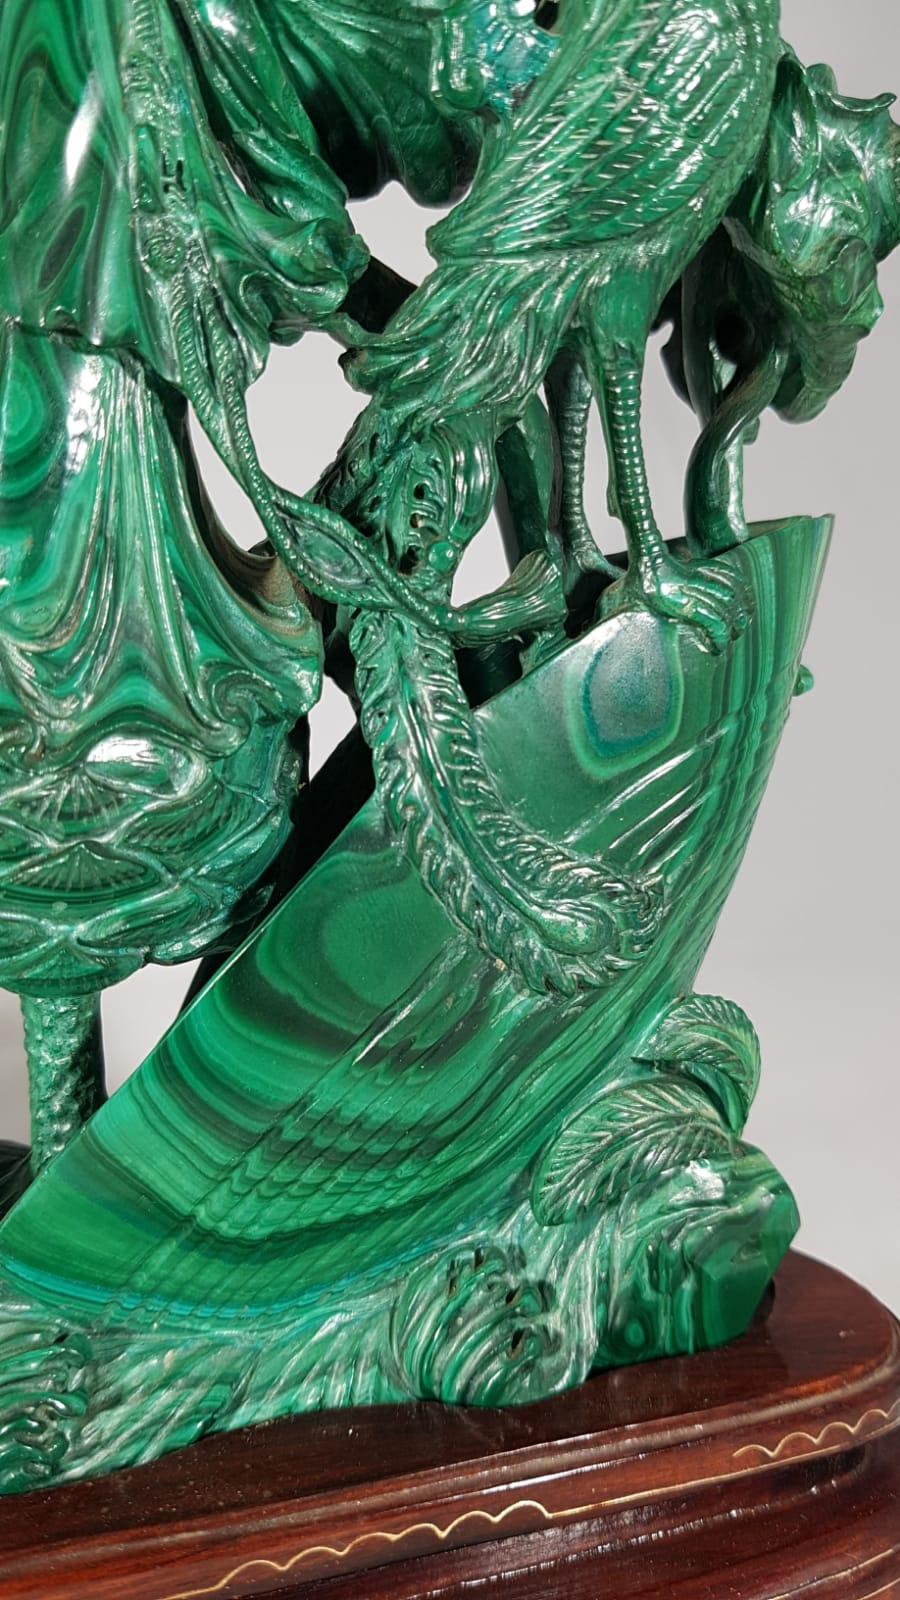 Green malachite female figure, China, late 19th/early 20th century sculpture, height 21.5 cm, length 19 cm, height with wooden base 25 cm. The wooden base is anatomical to the base of the sculpture and has inlays with brass wire to create an